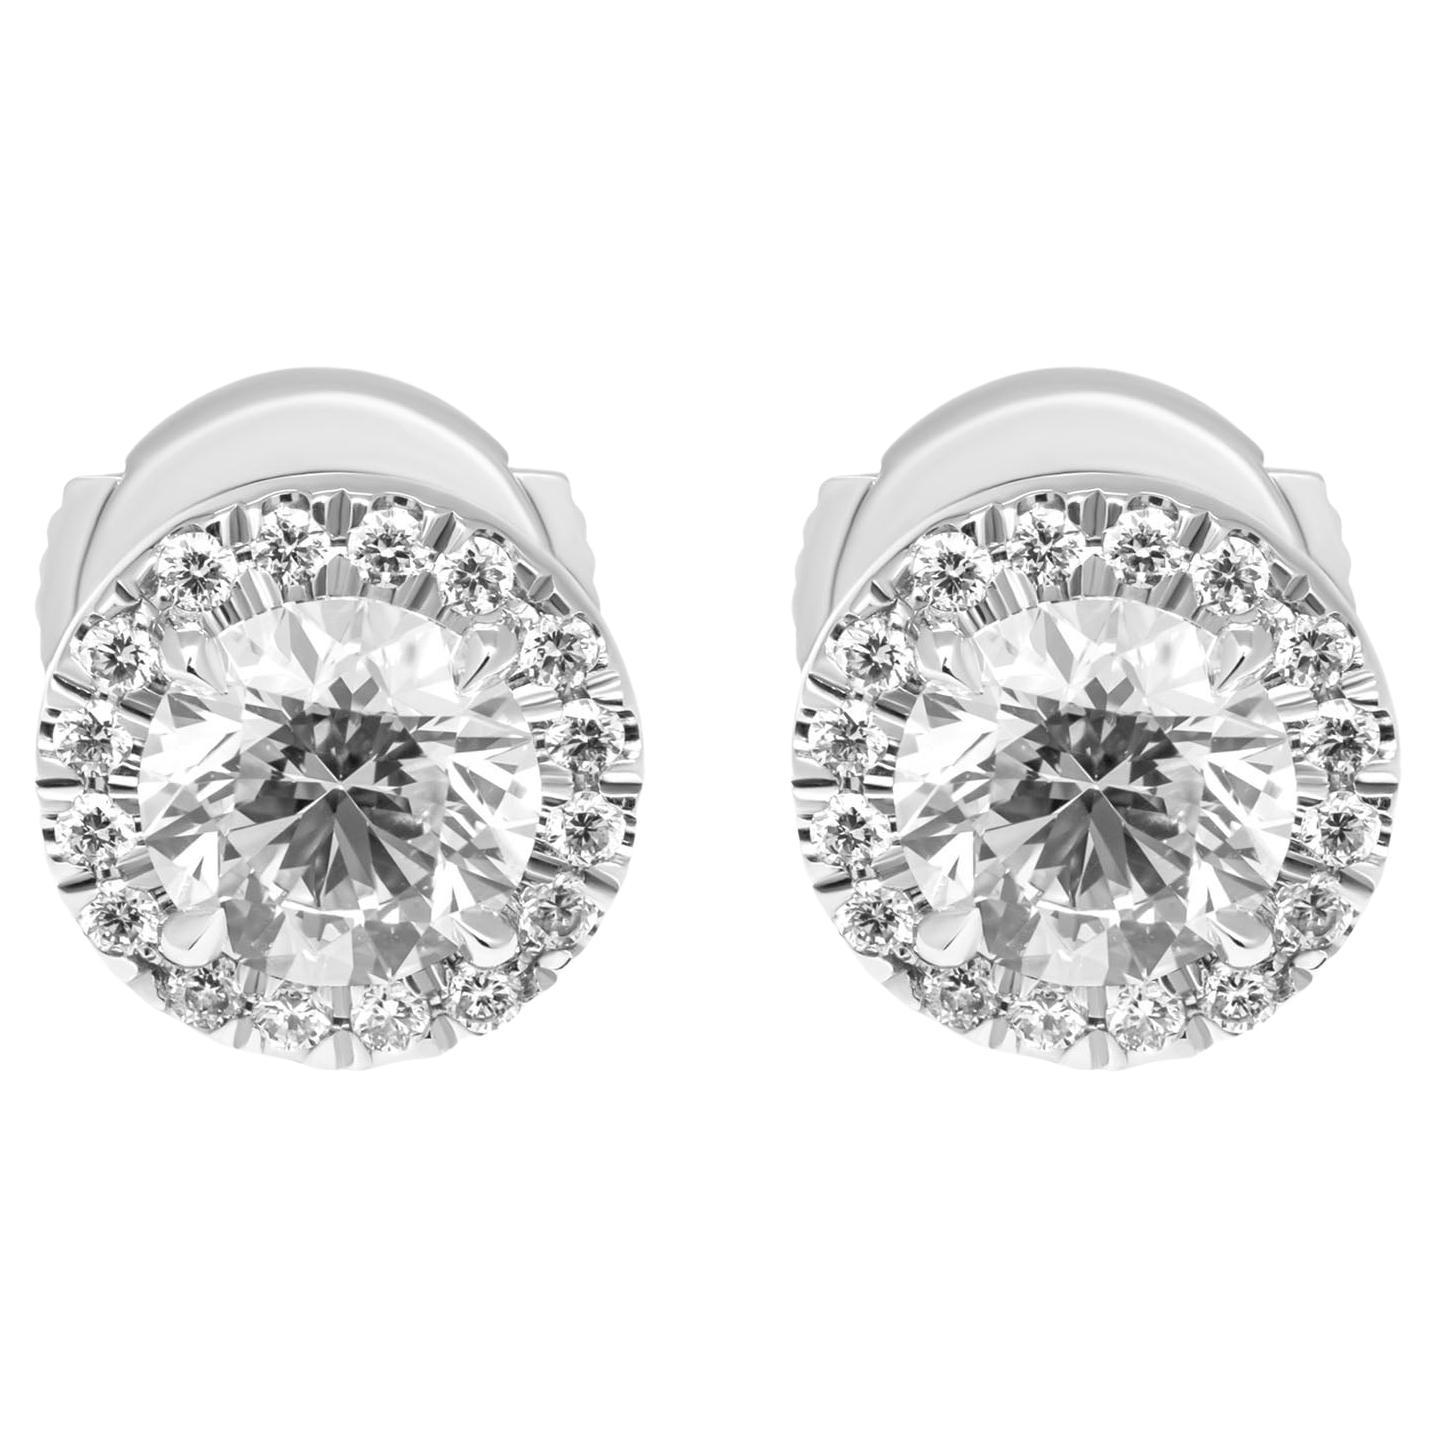  Classic halo with Round 0.70 carat Diamond studs in Platinum For Sale